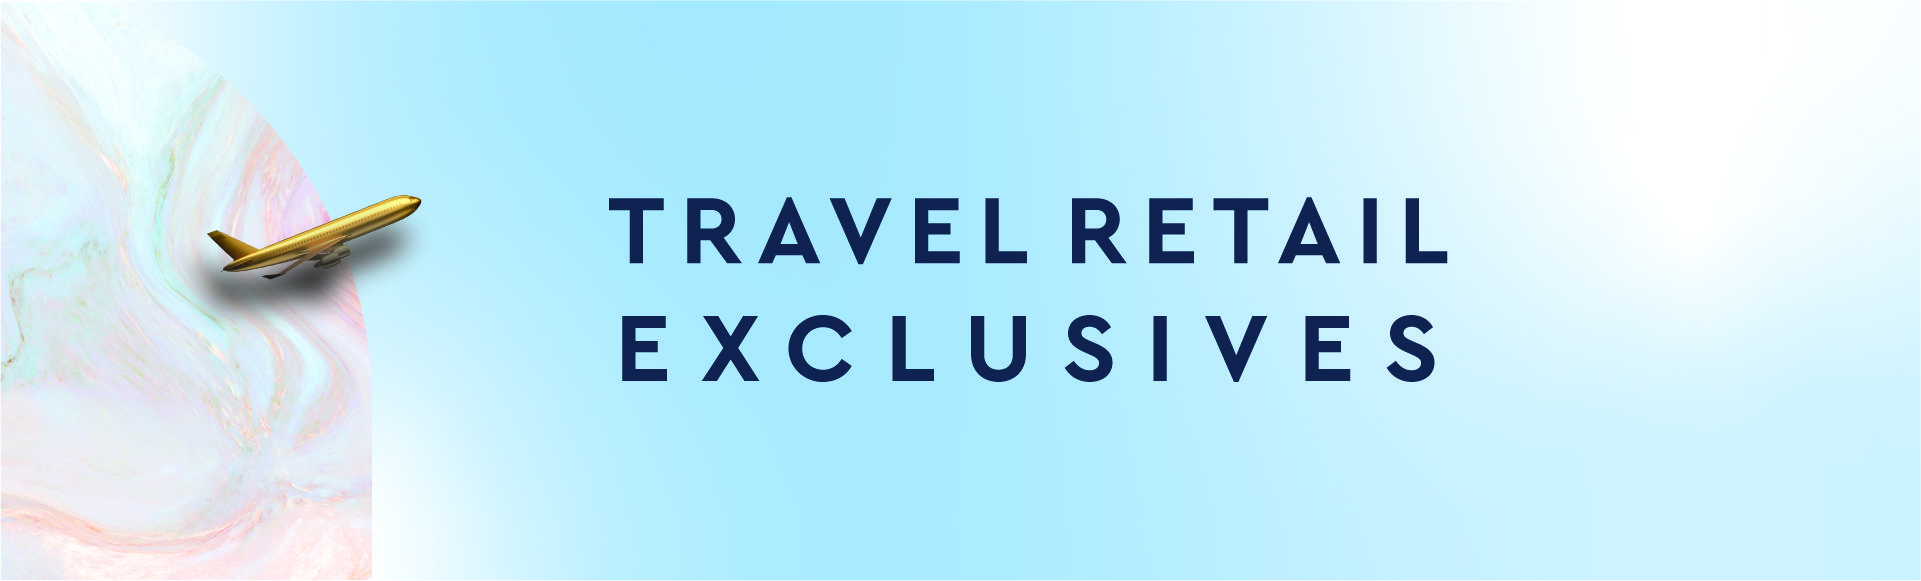 Travel Retail Exclusives